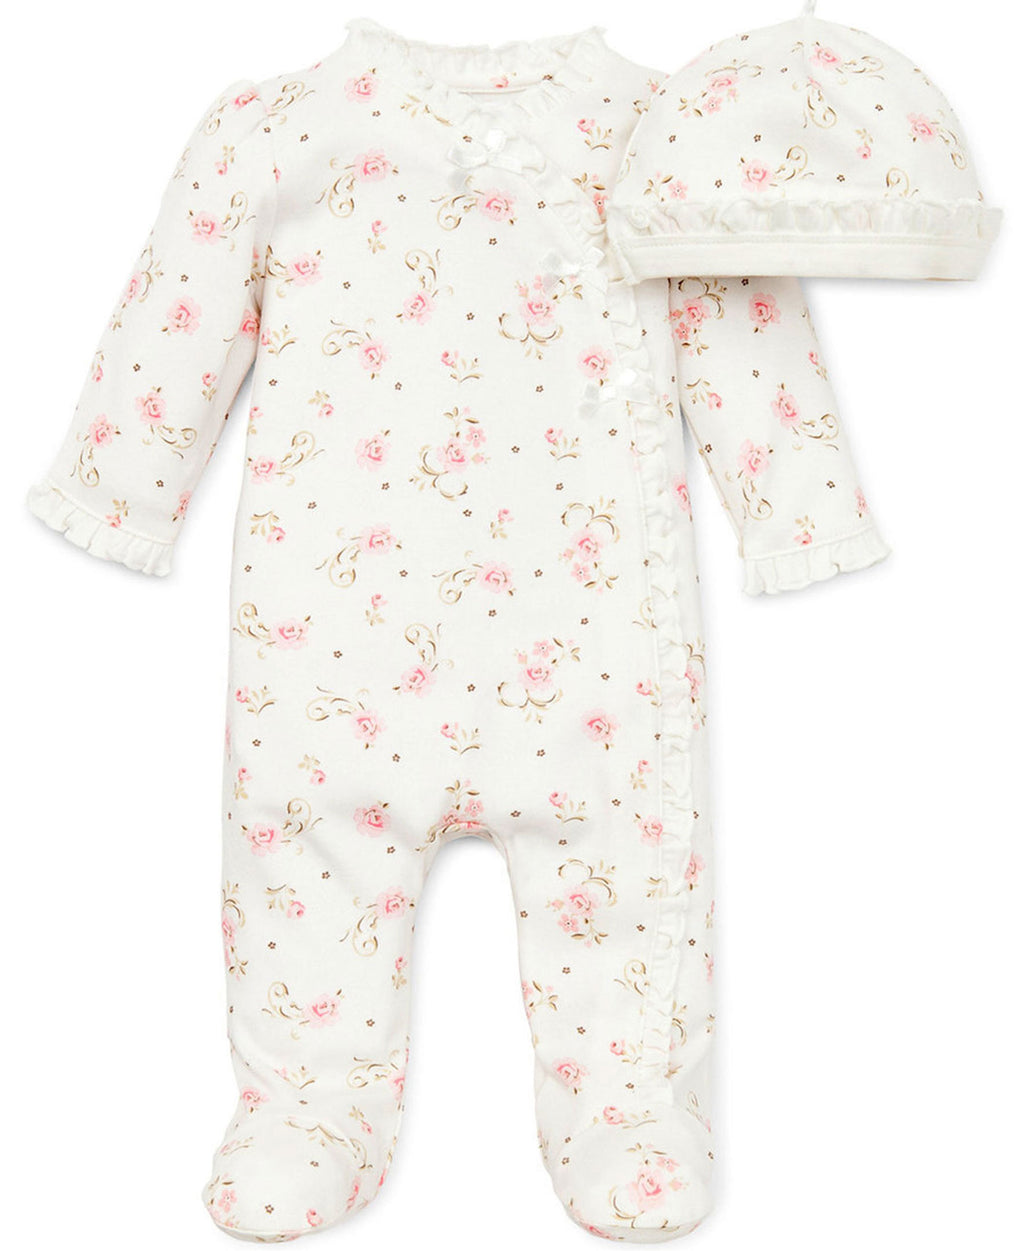 Little Me - Monkey Footed Sleeper – Beaus & Babes Boutique